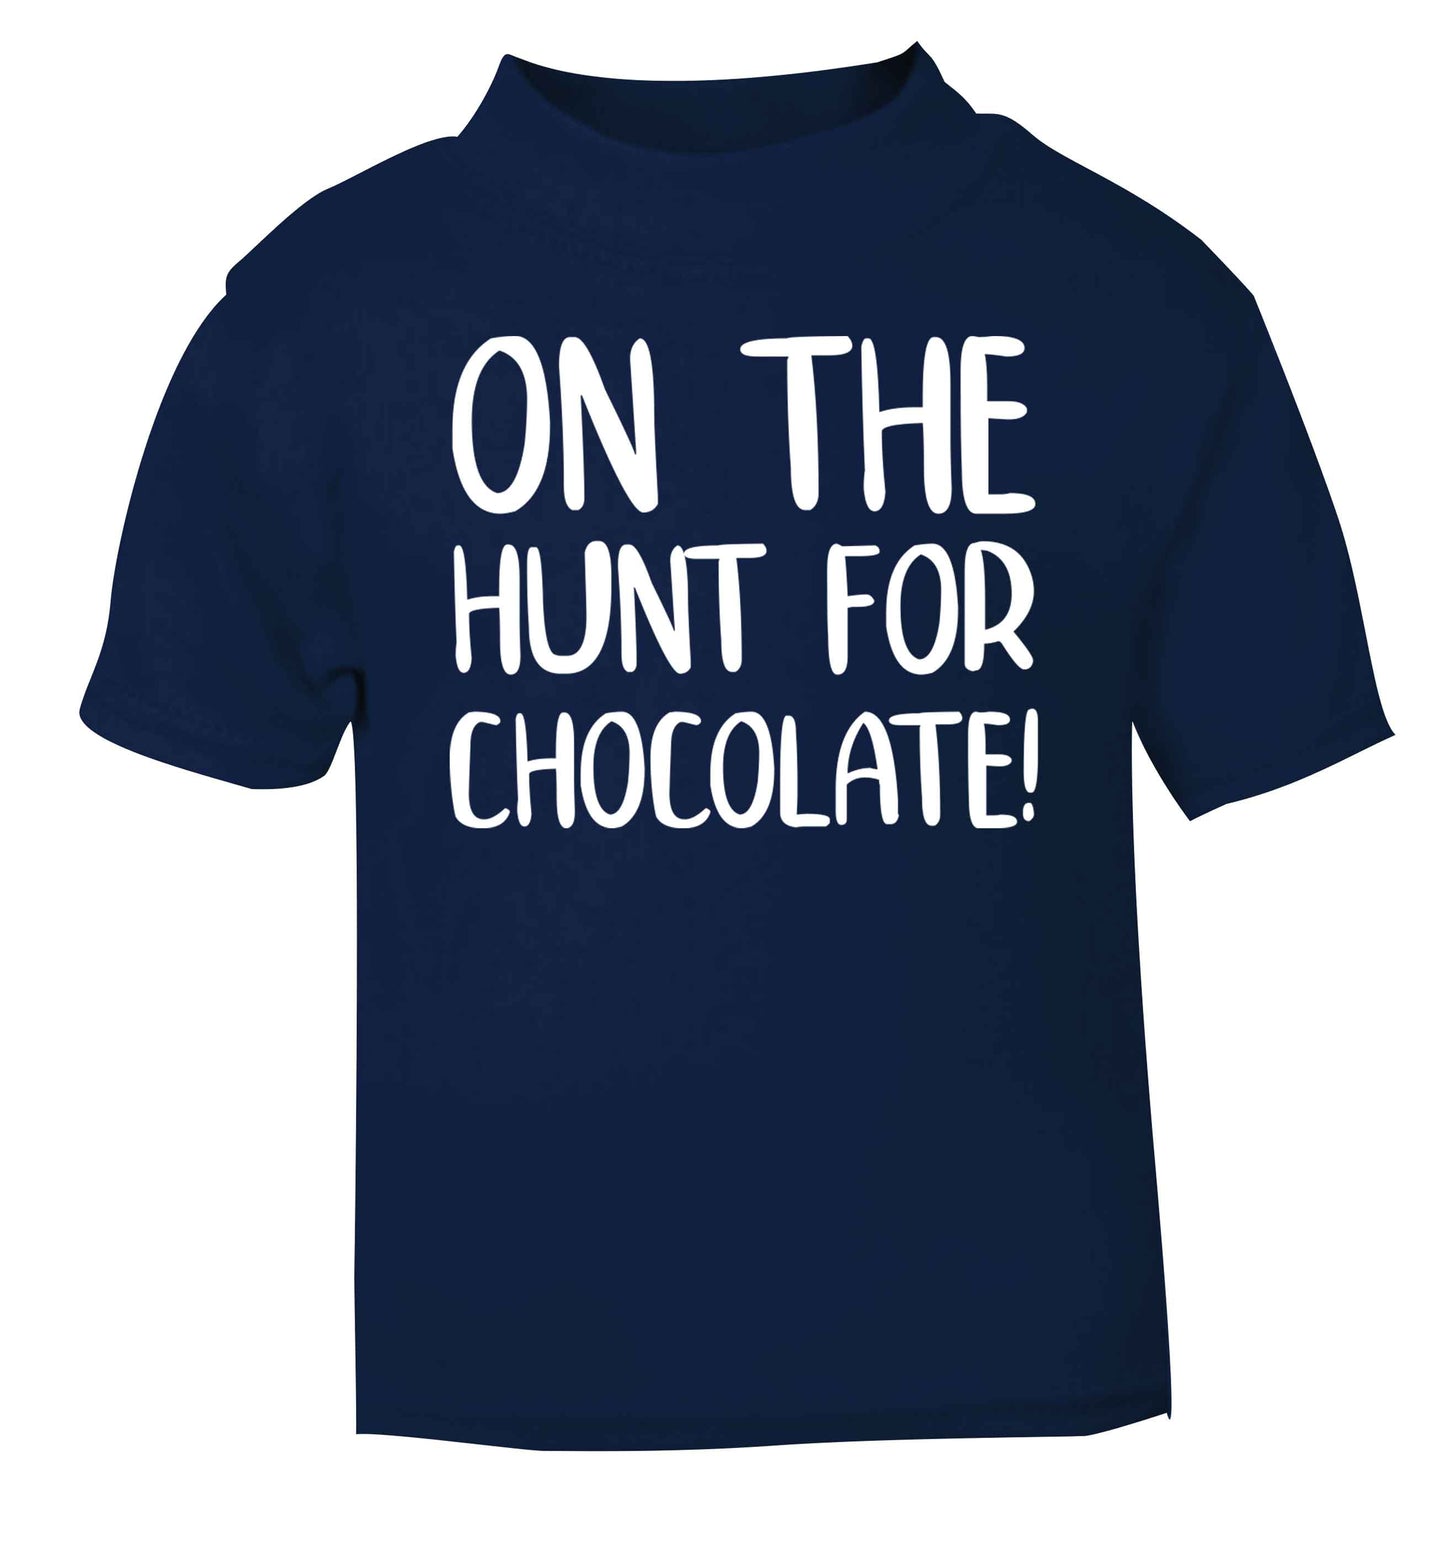 On the hunt for chocolate! navy baby toddler Tshirt 2 Years